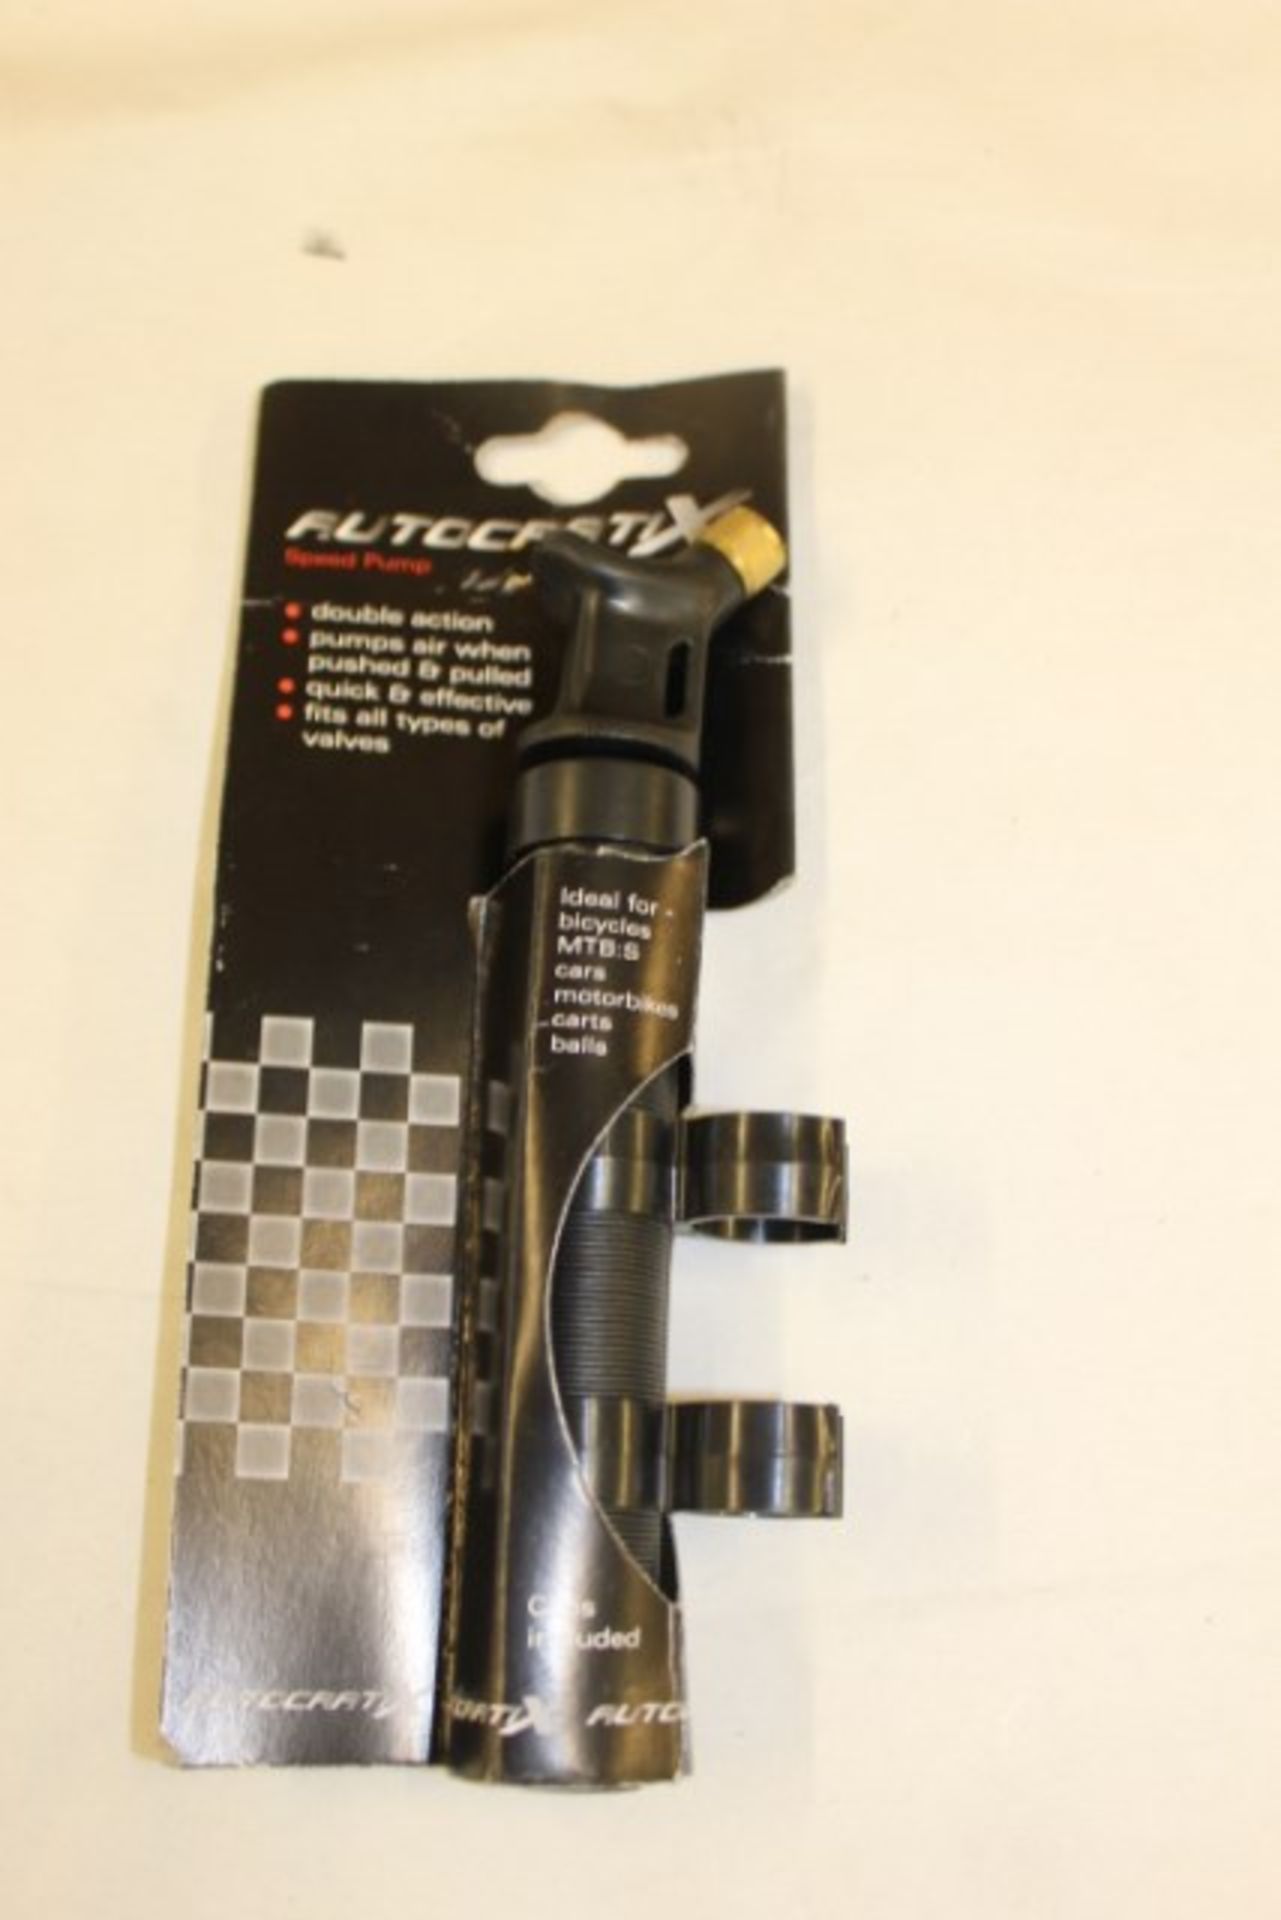 V Autocratix Double Action Bicycle Speed Pump - Image 2 of 2